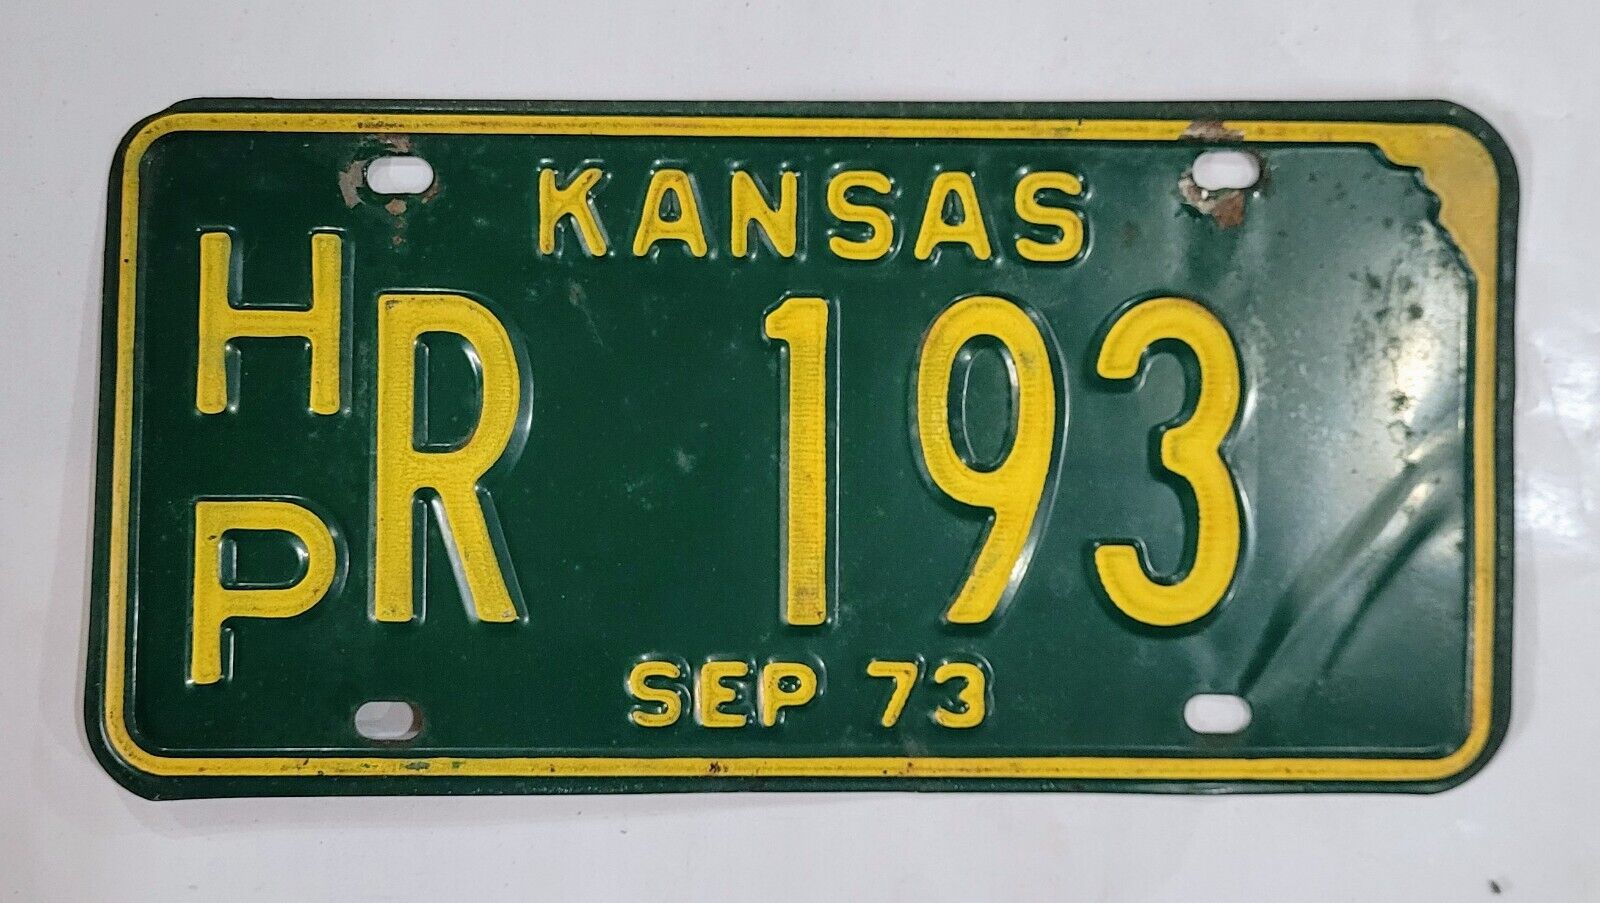 1973 KANSAS License Plate 🔥FREE SHIPPING🔥 HP R 193 ~NICE VINTAGE ANTIQUE PLATE